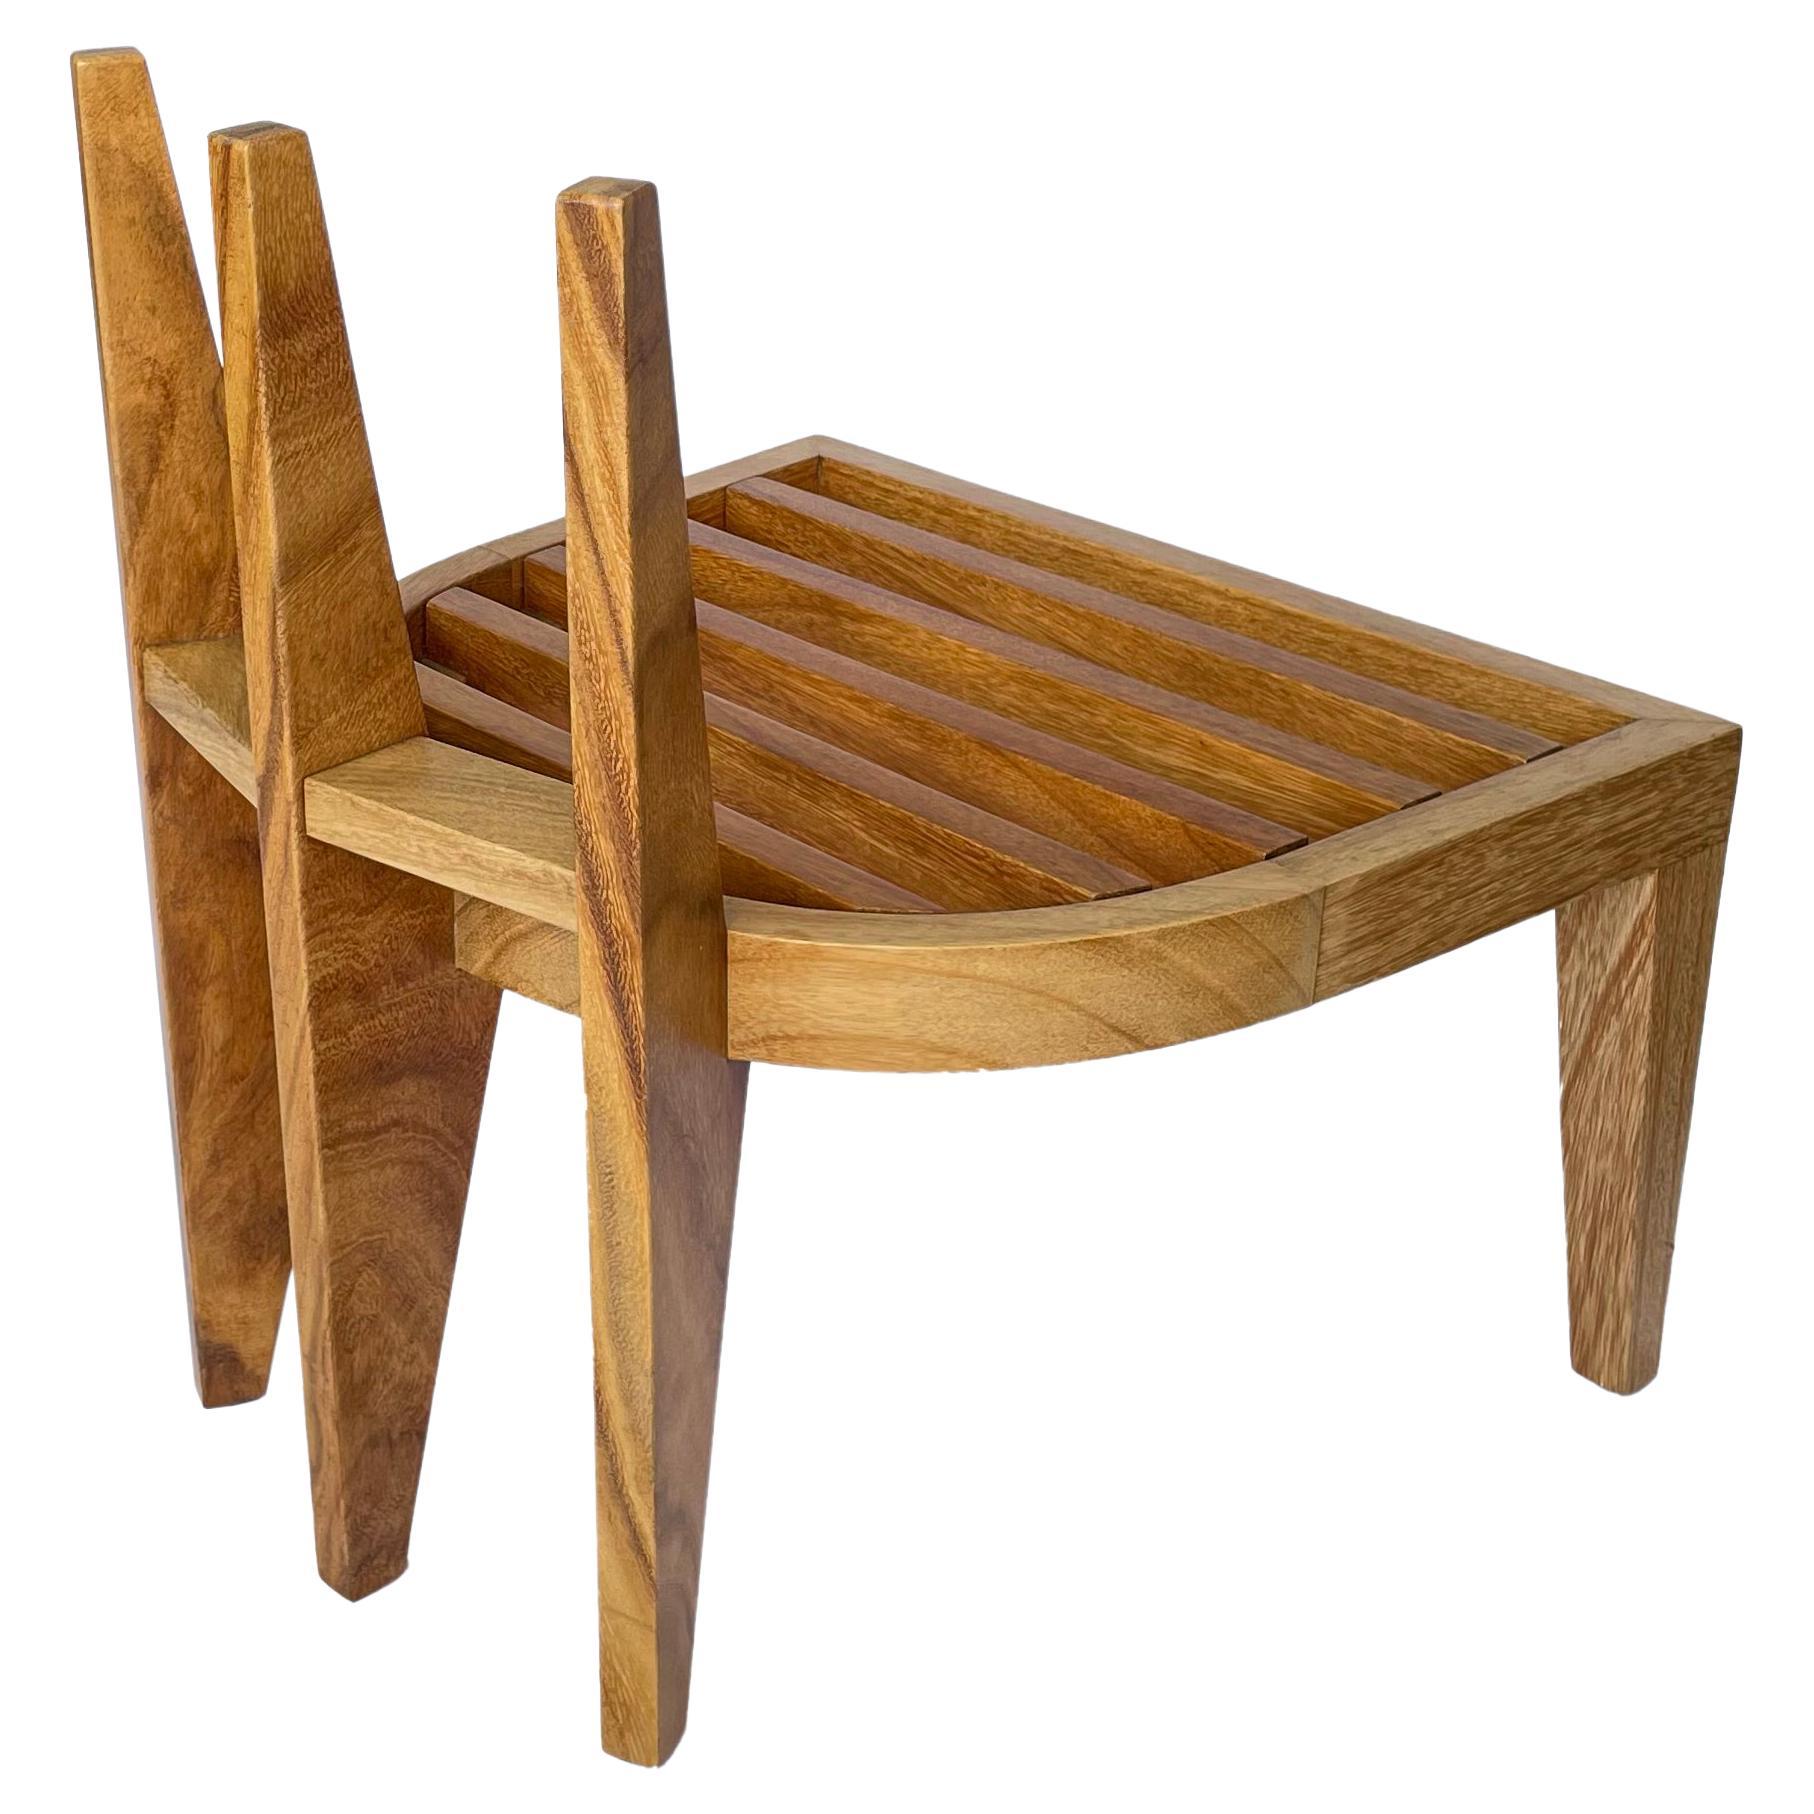 Hand-Crafted Modern Wood Stool by Pierre Sarkis For Sale